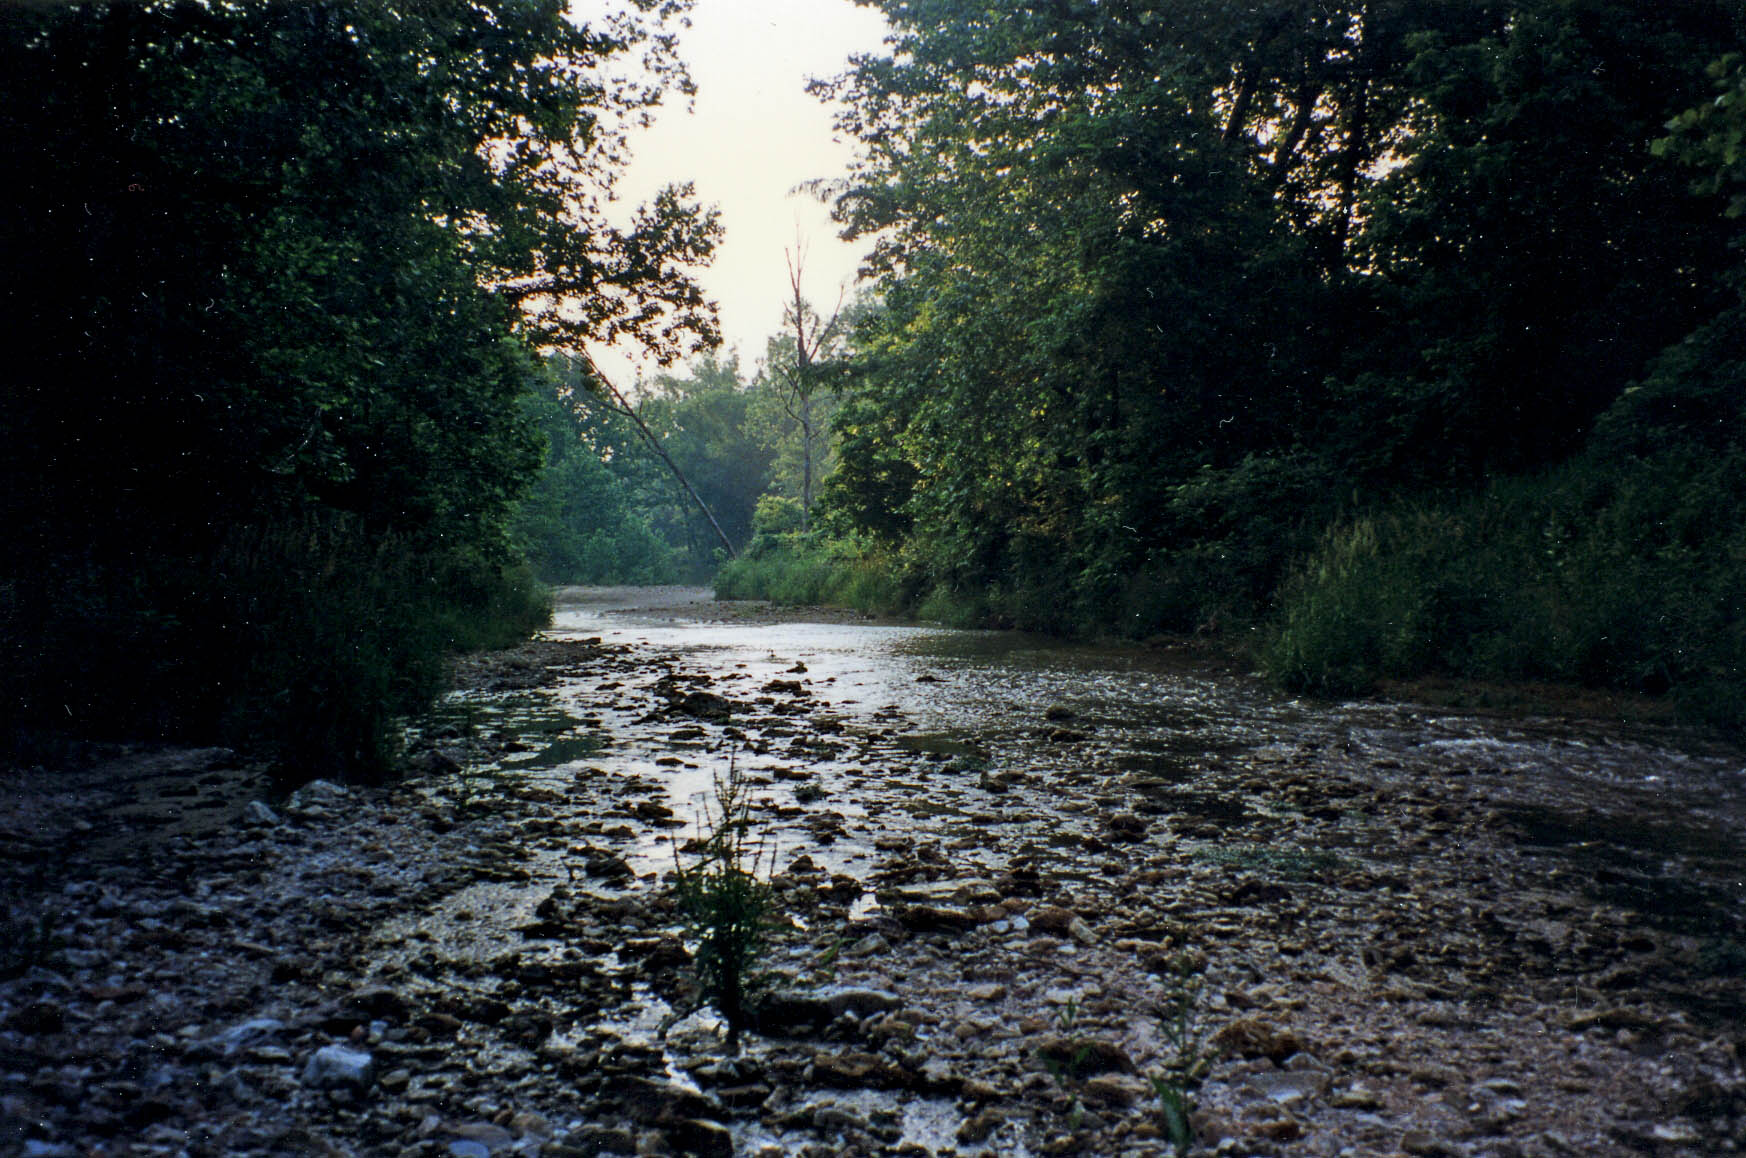 Early Morning on Blue Springs Creek